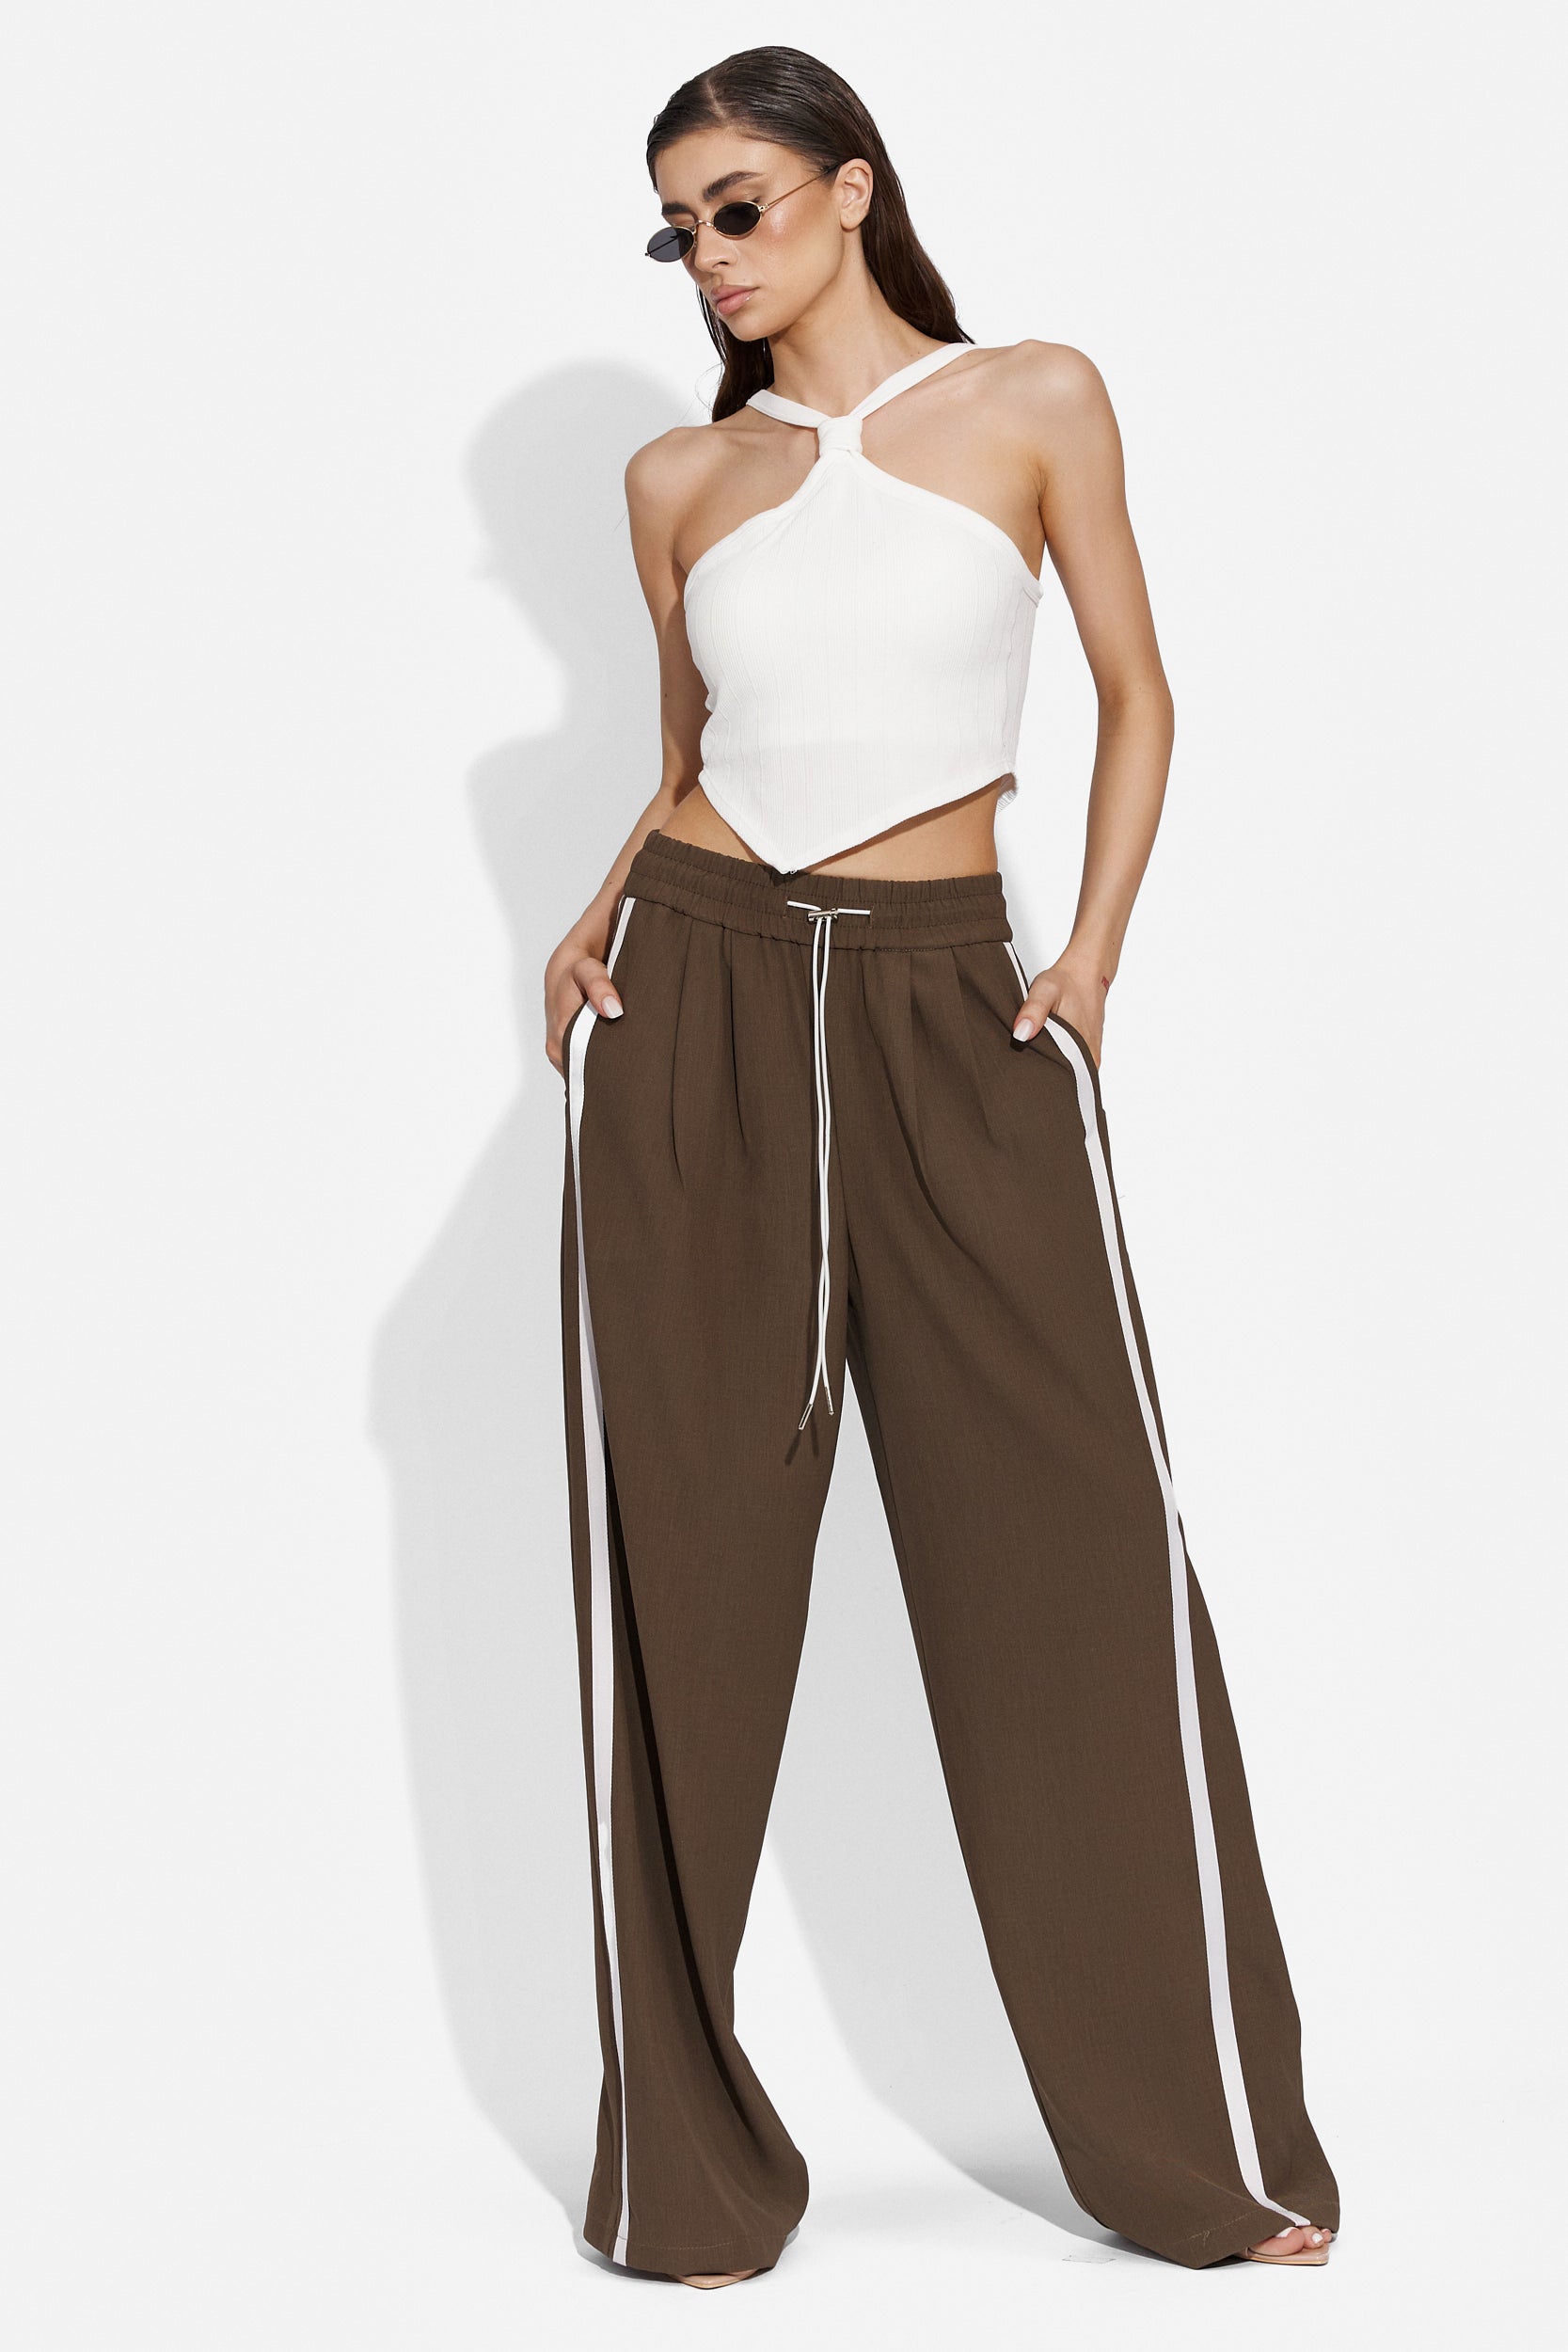 Casual brown ladies trousers Floreina Bogas